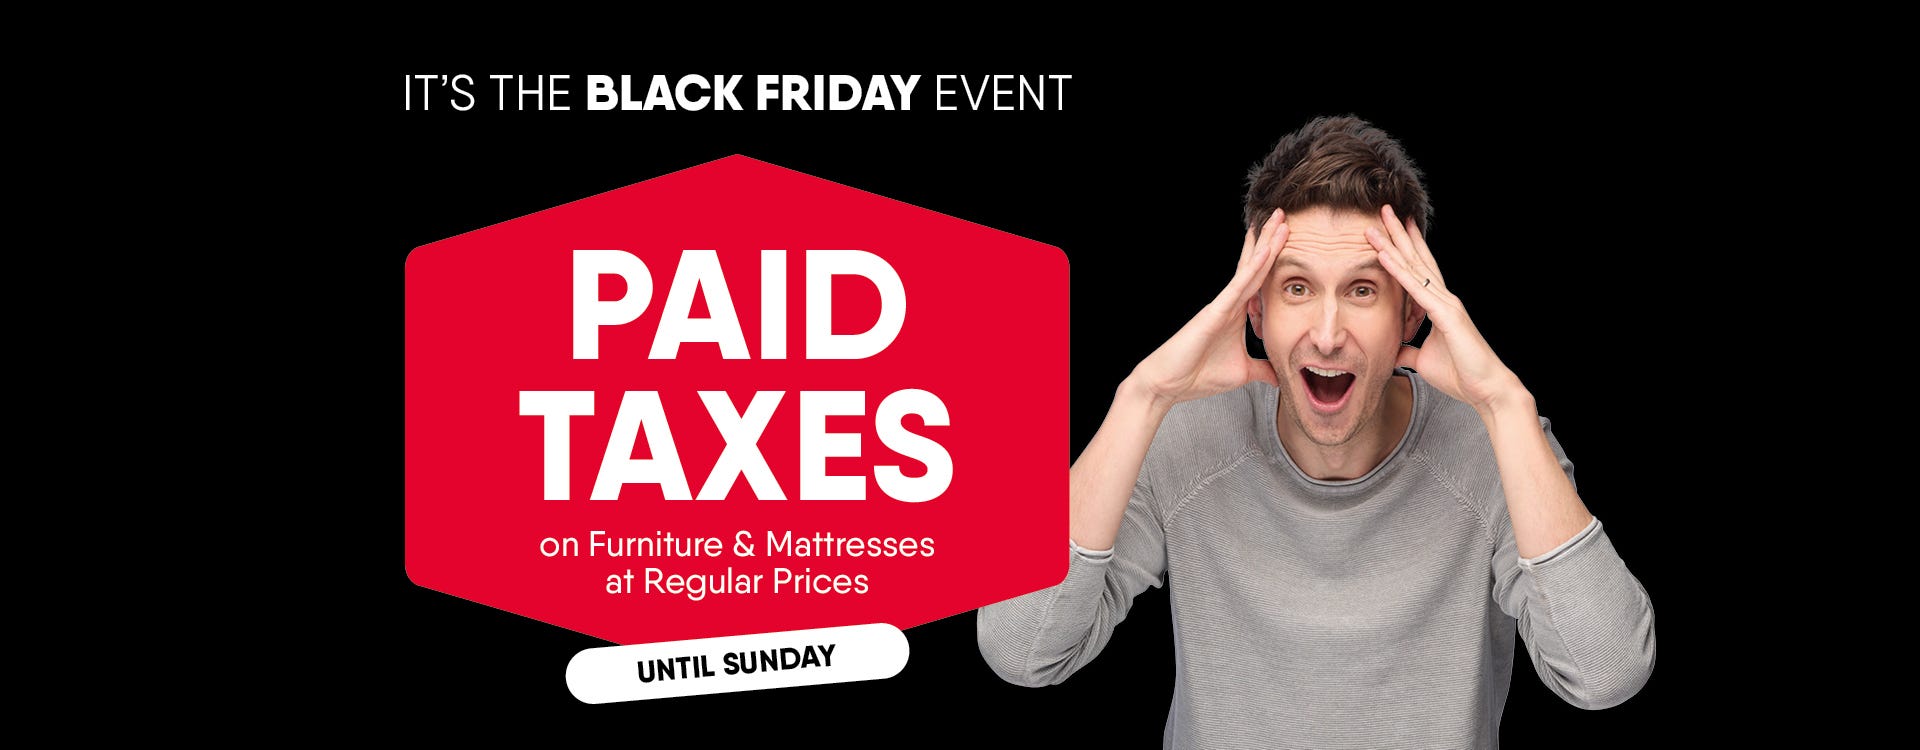 It's the Black Friday Event! Paid Taxes on Furniture & Mattresses at regular Prices! Until Sunday!